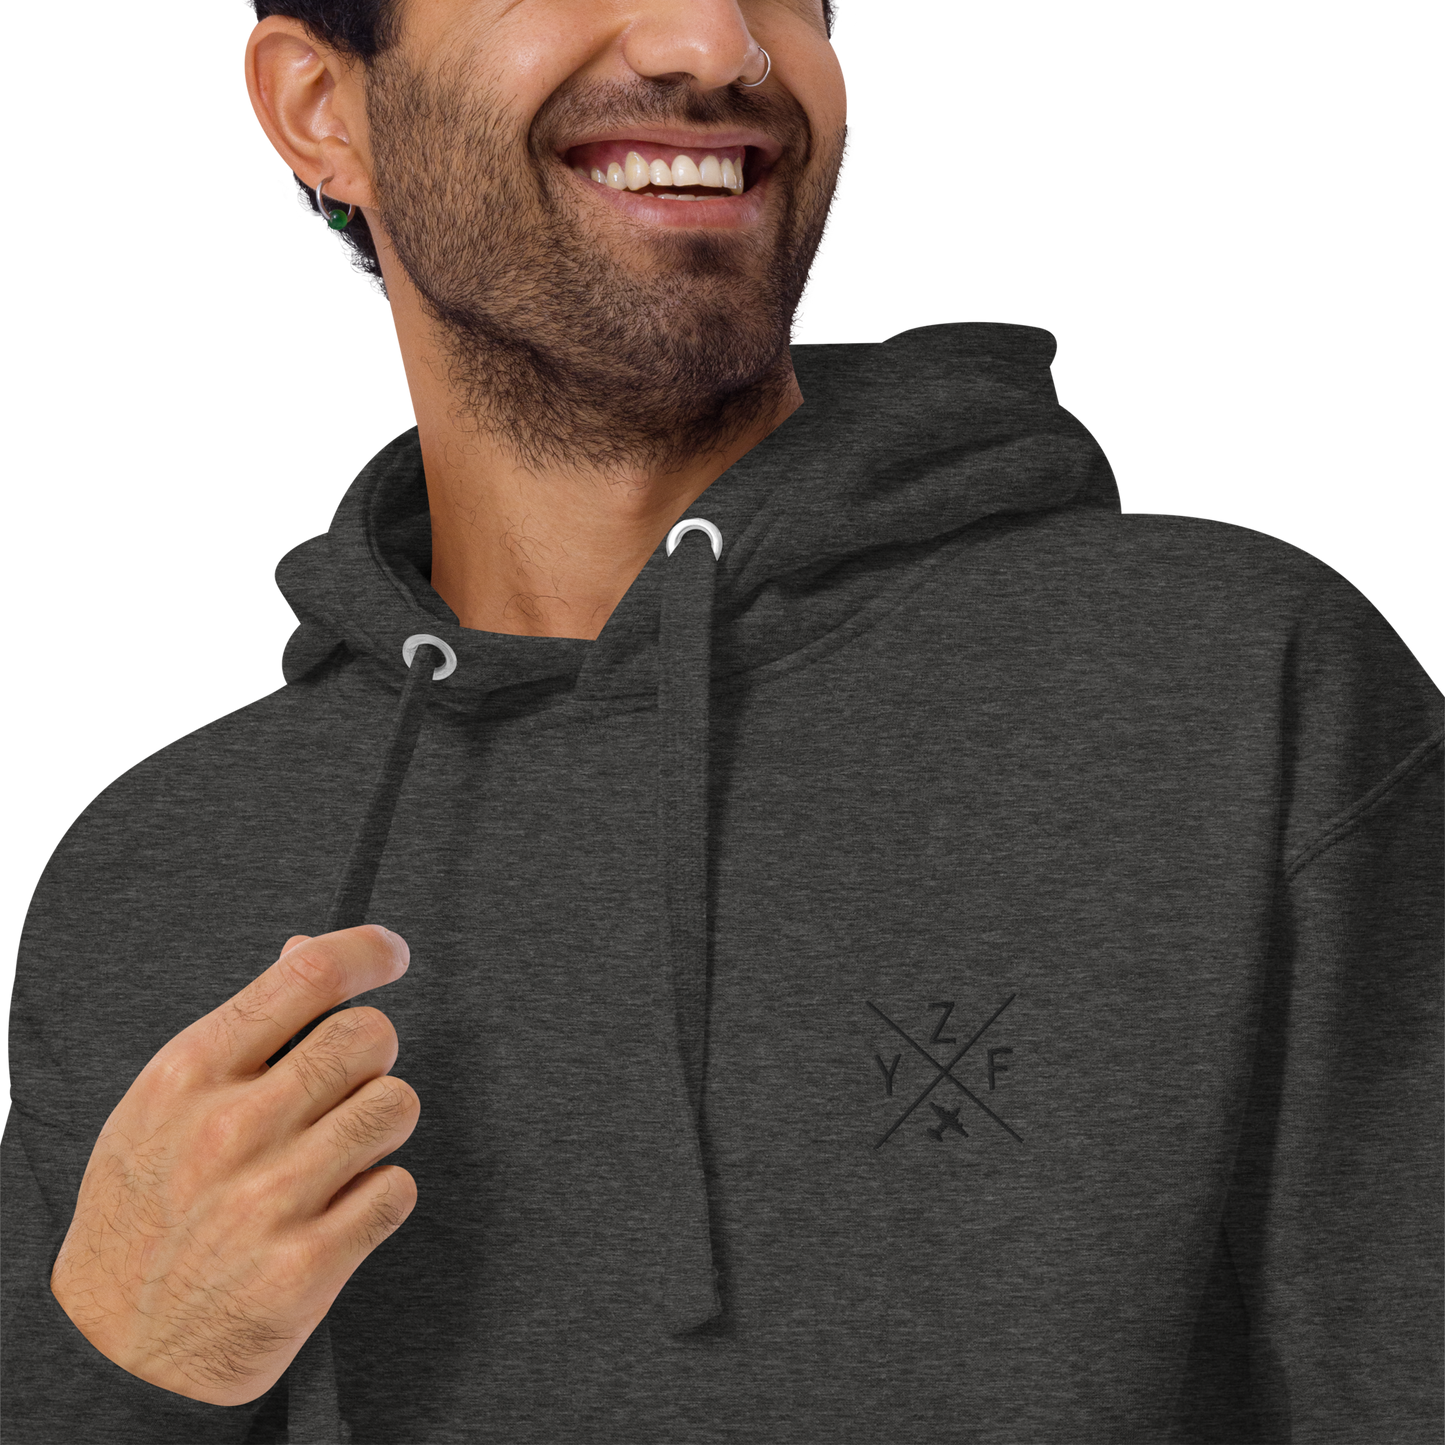 YHM Designs - YZF Yellowknife Premium Hoodie - Crossed-X Design with Airport Code and Vintage Propliner - Black Embroidery - Image 12